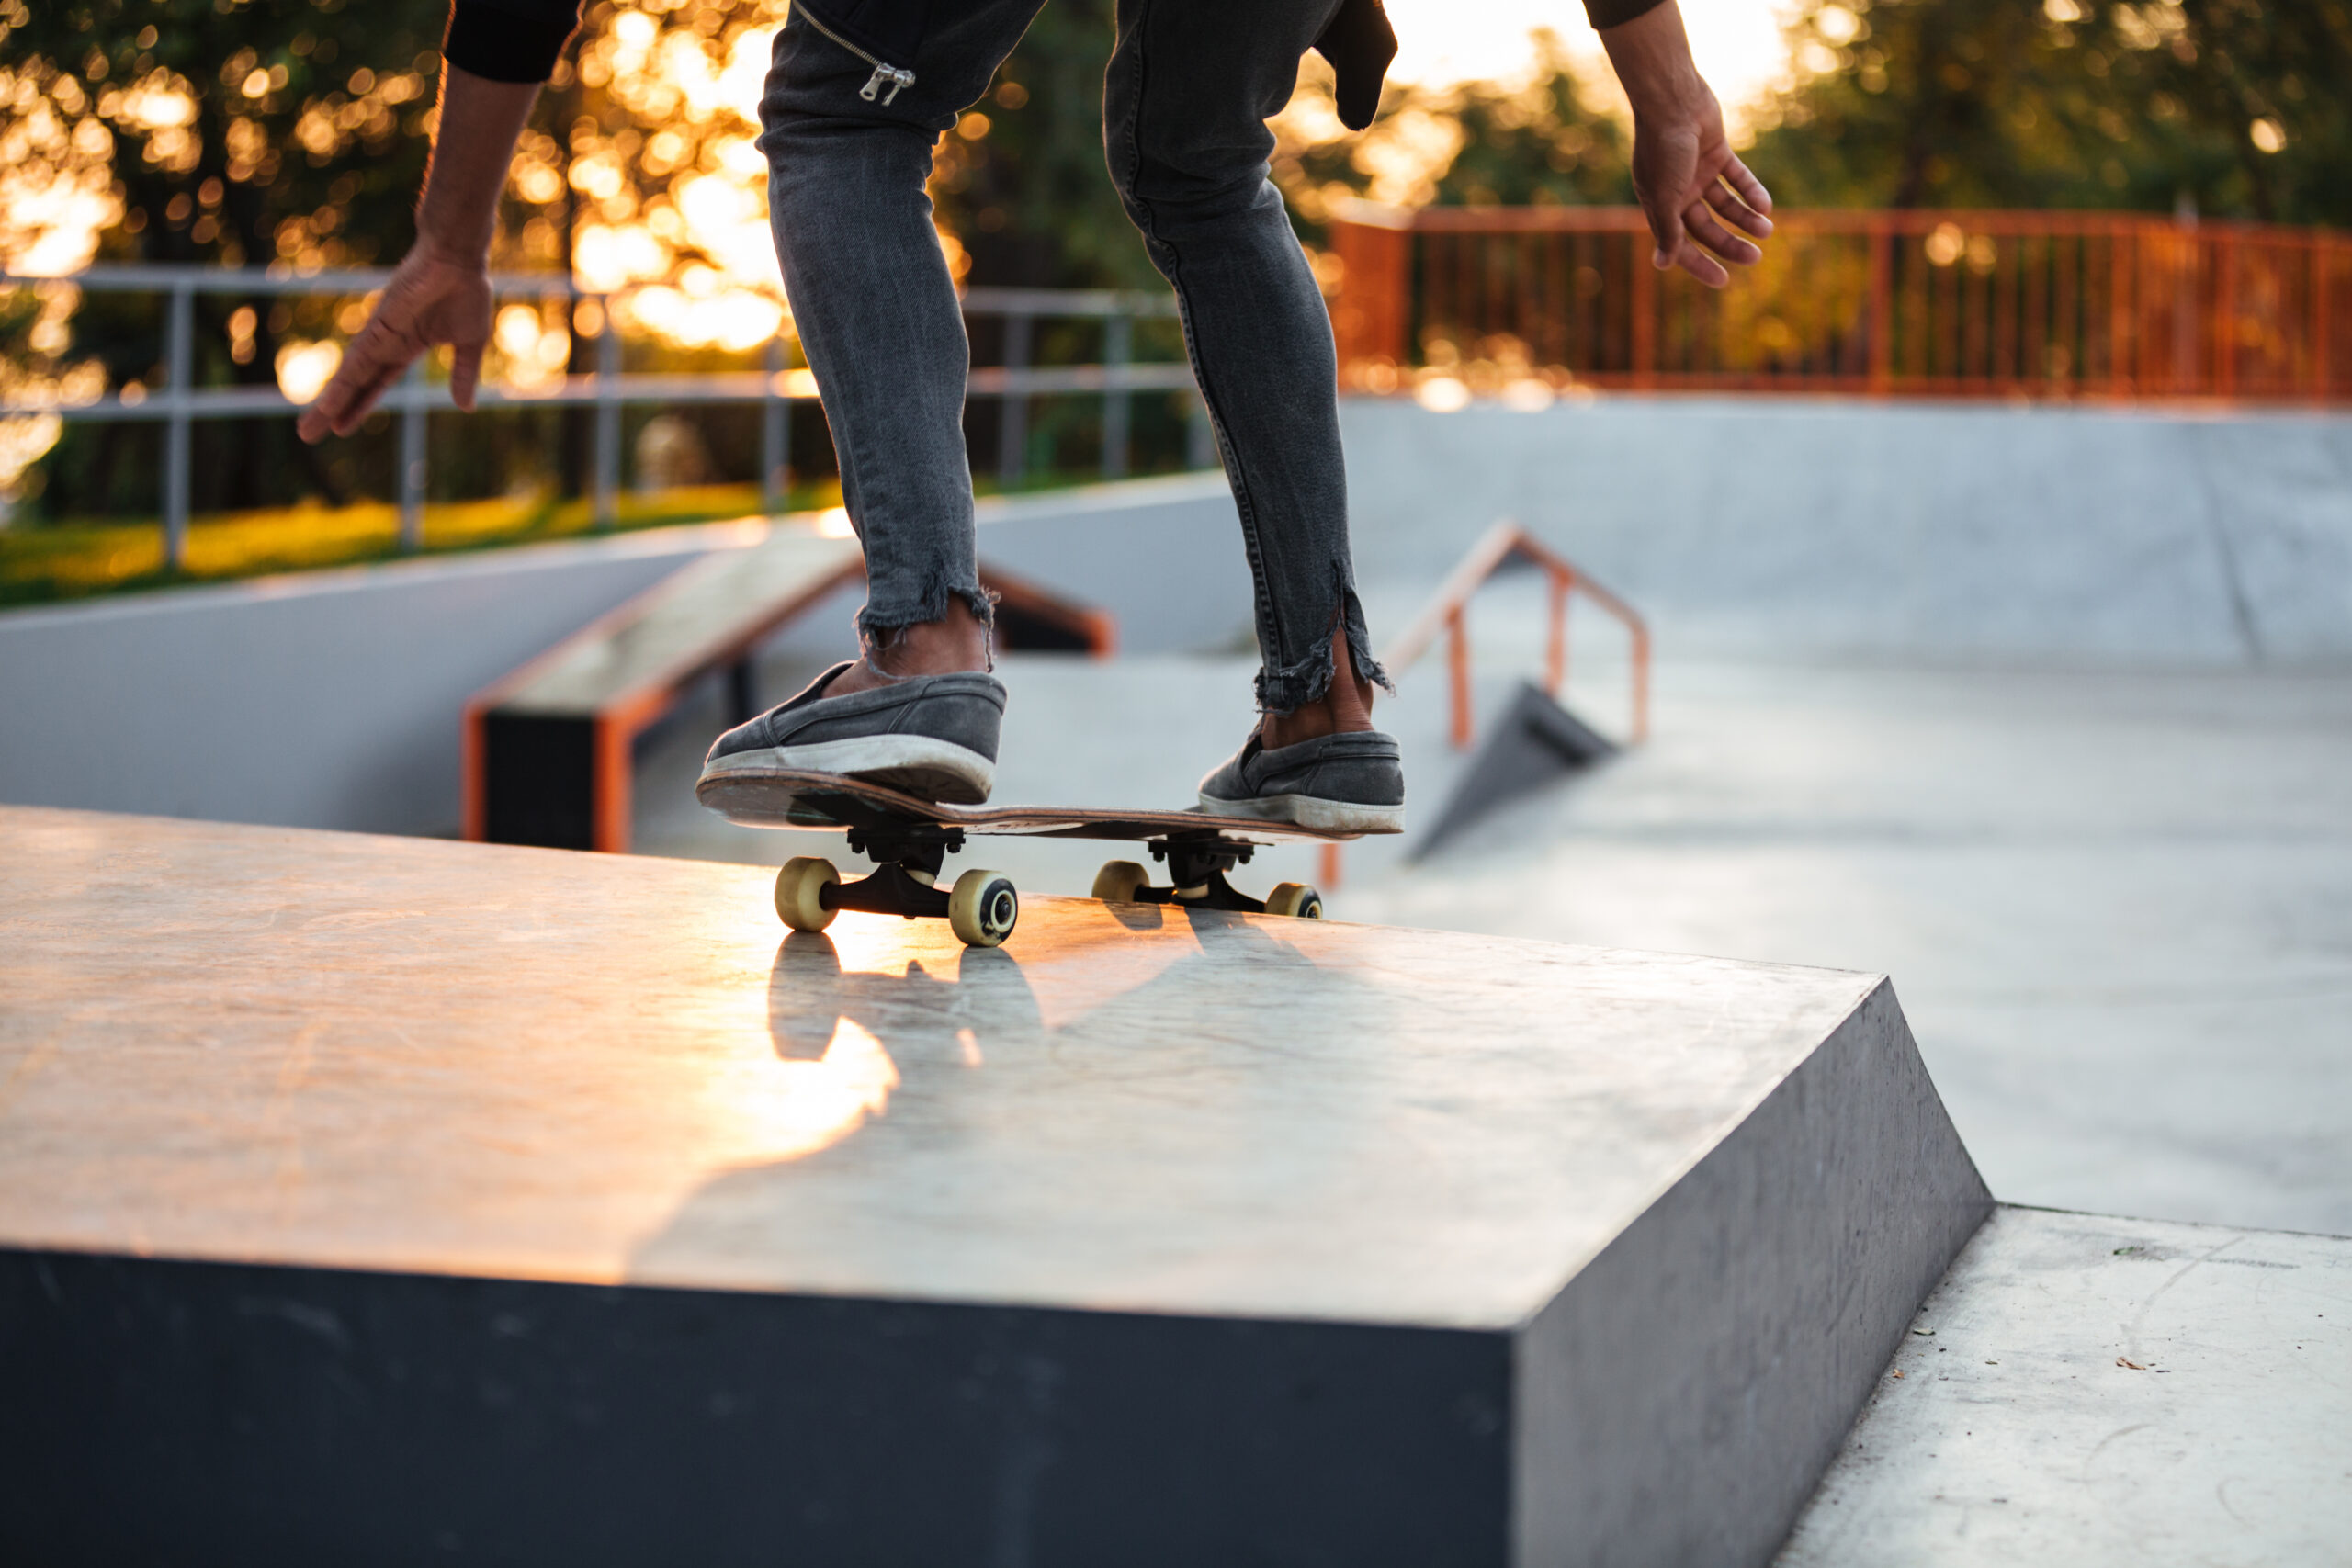 Discover the Top 10 Tech Deck Ramps for Mind-Blowing Tricks